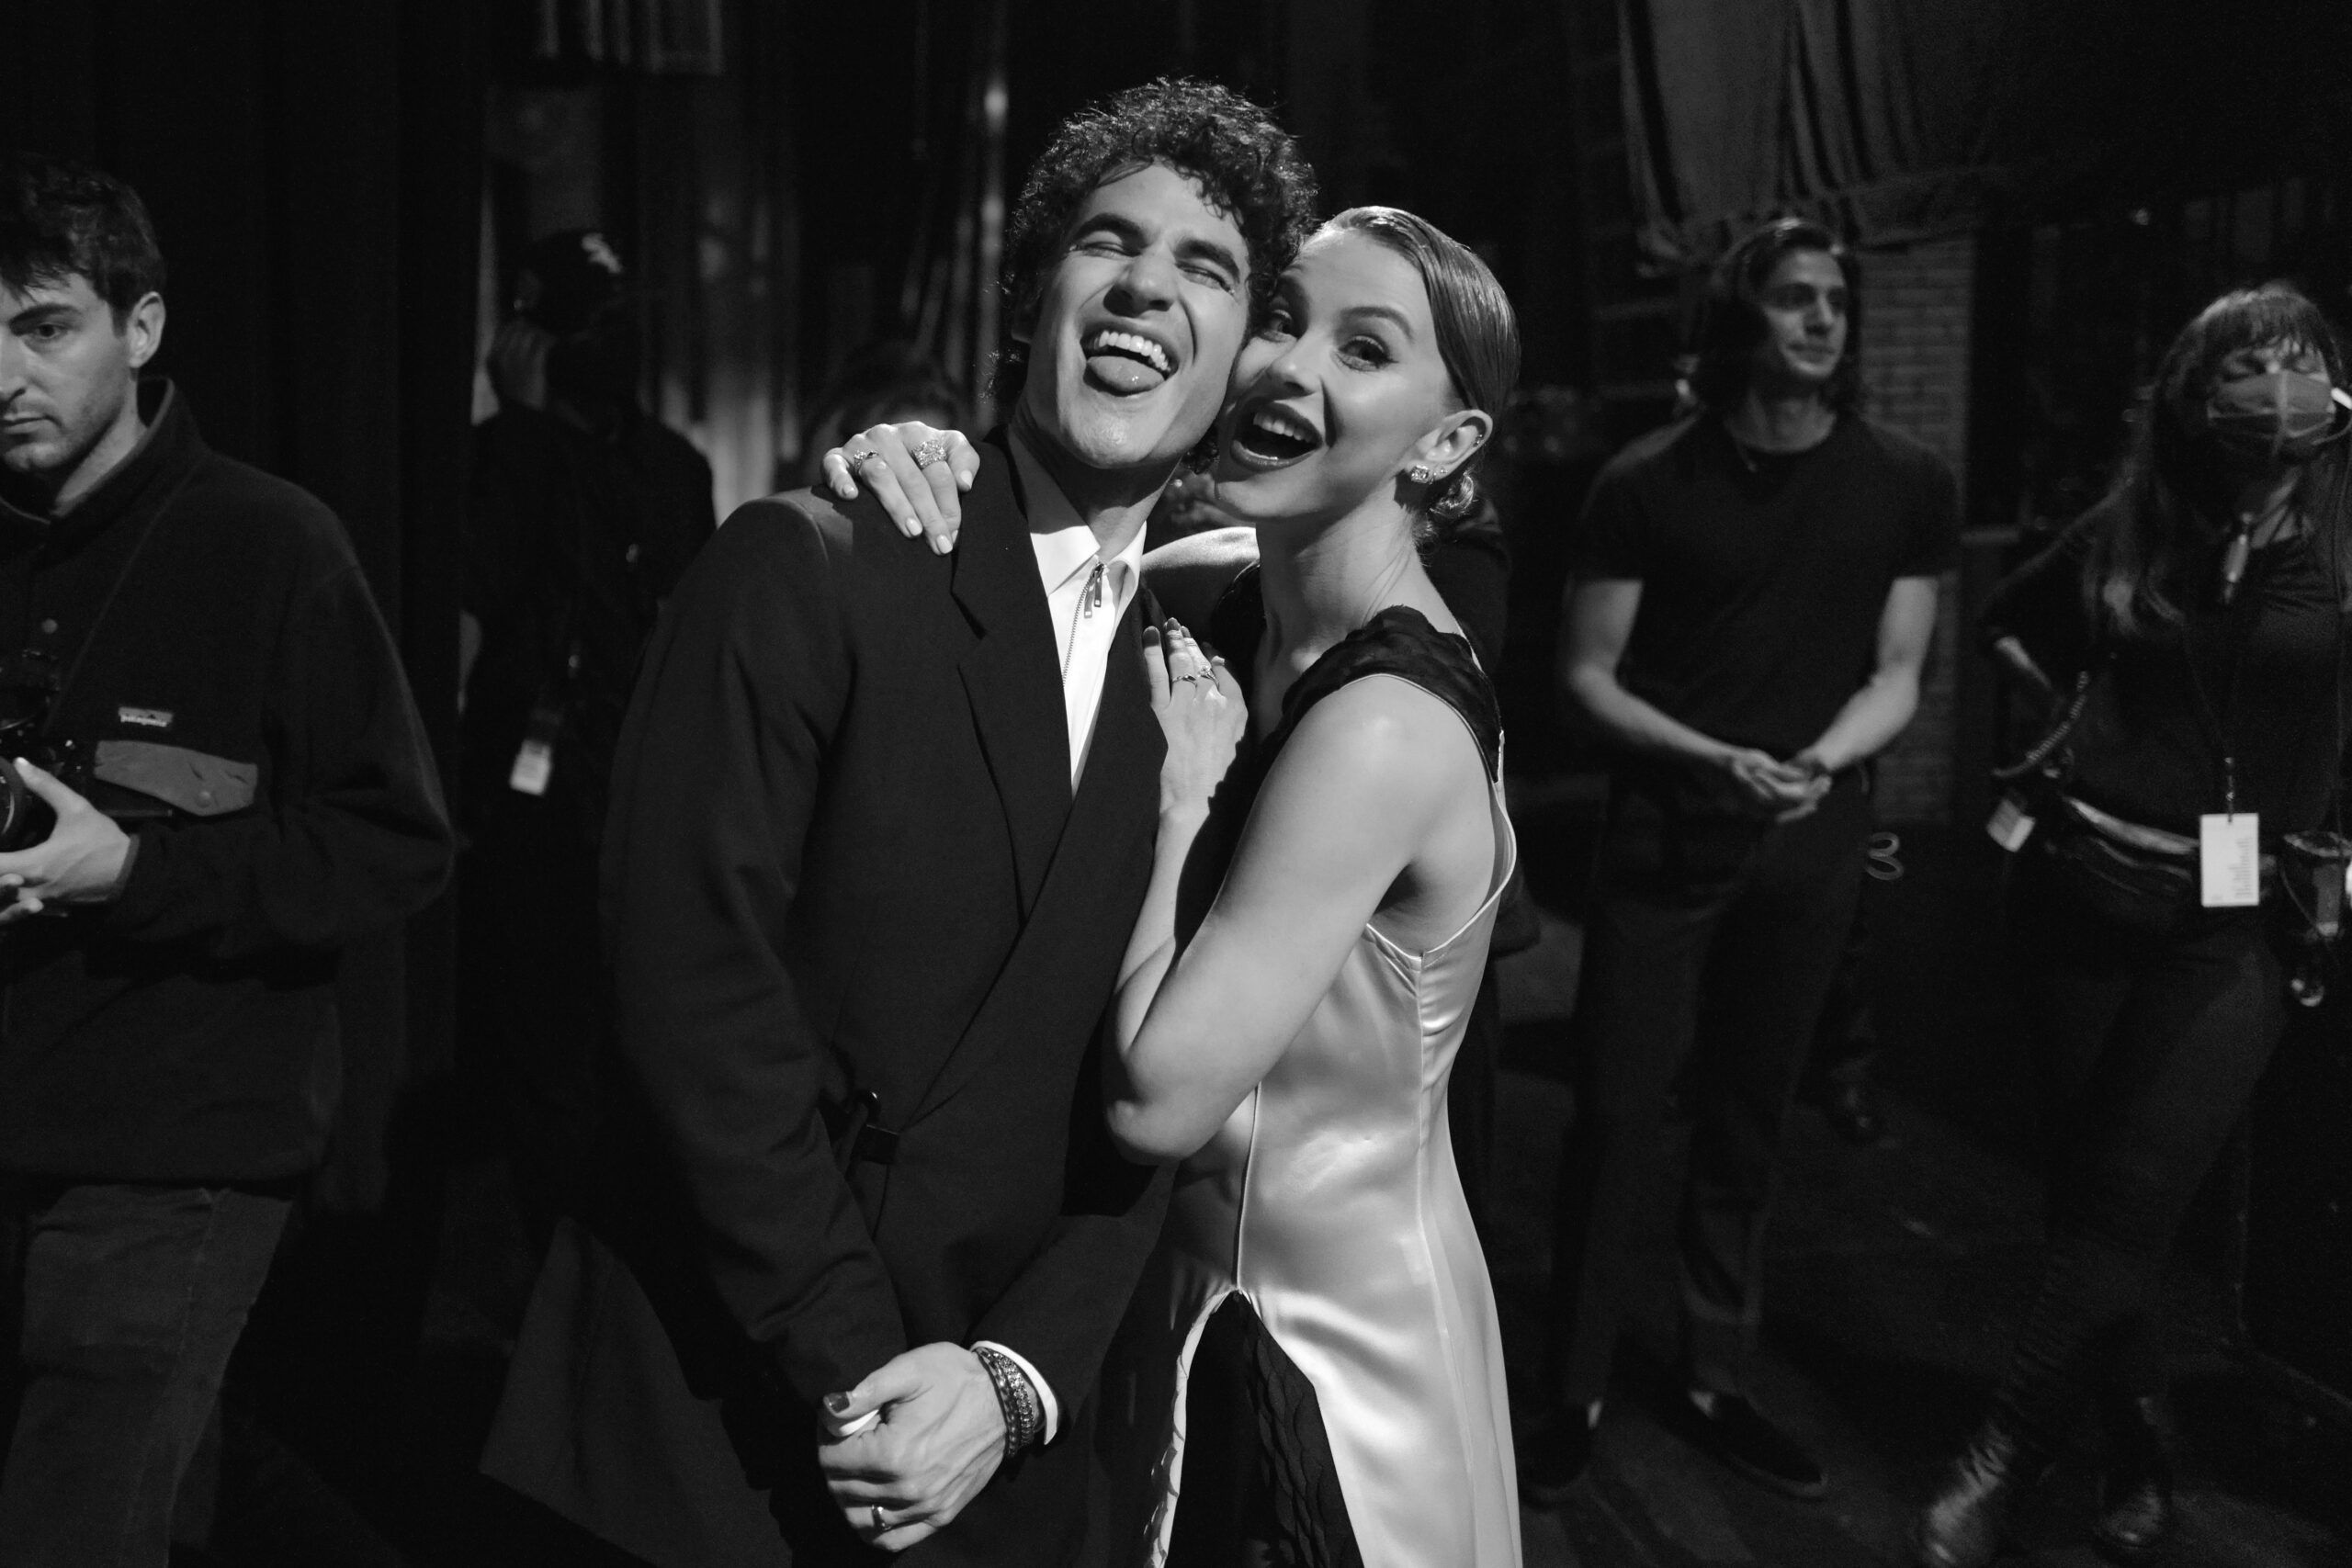 Darren Criss and Julianne Hough at the 75th Annual Tony Awards. Photo by Jenny Anderson/Getty Images for Tony Awards Productions.